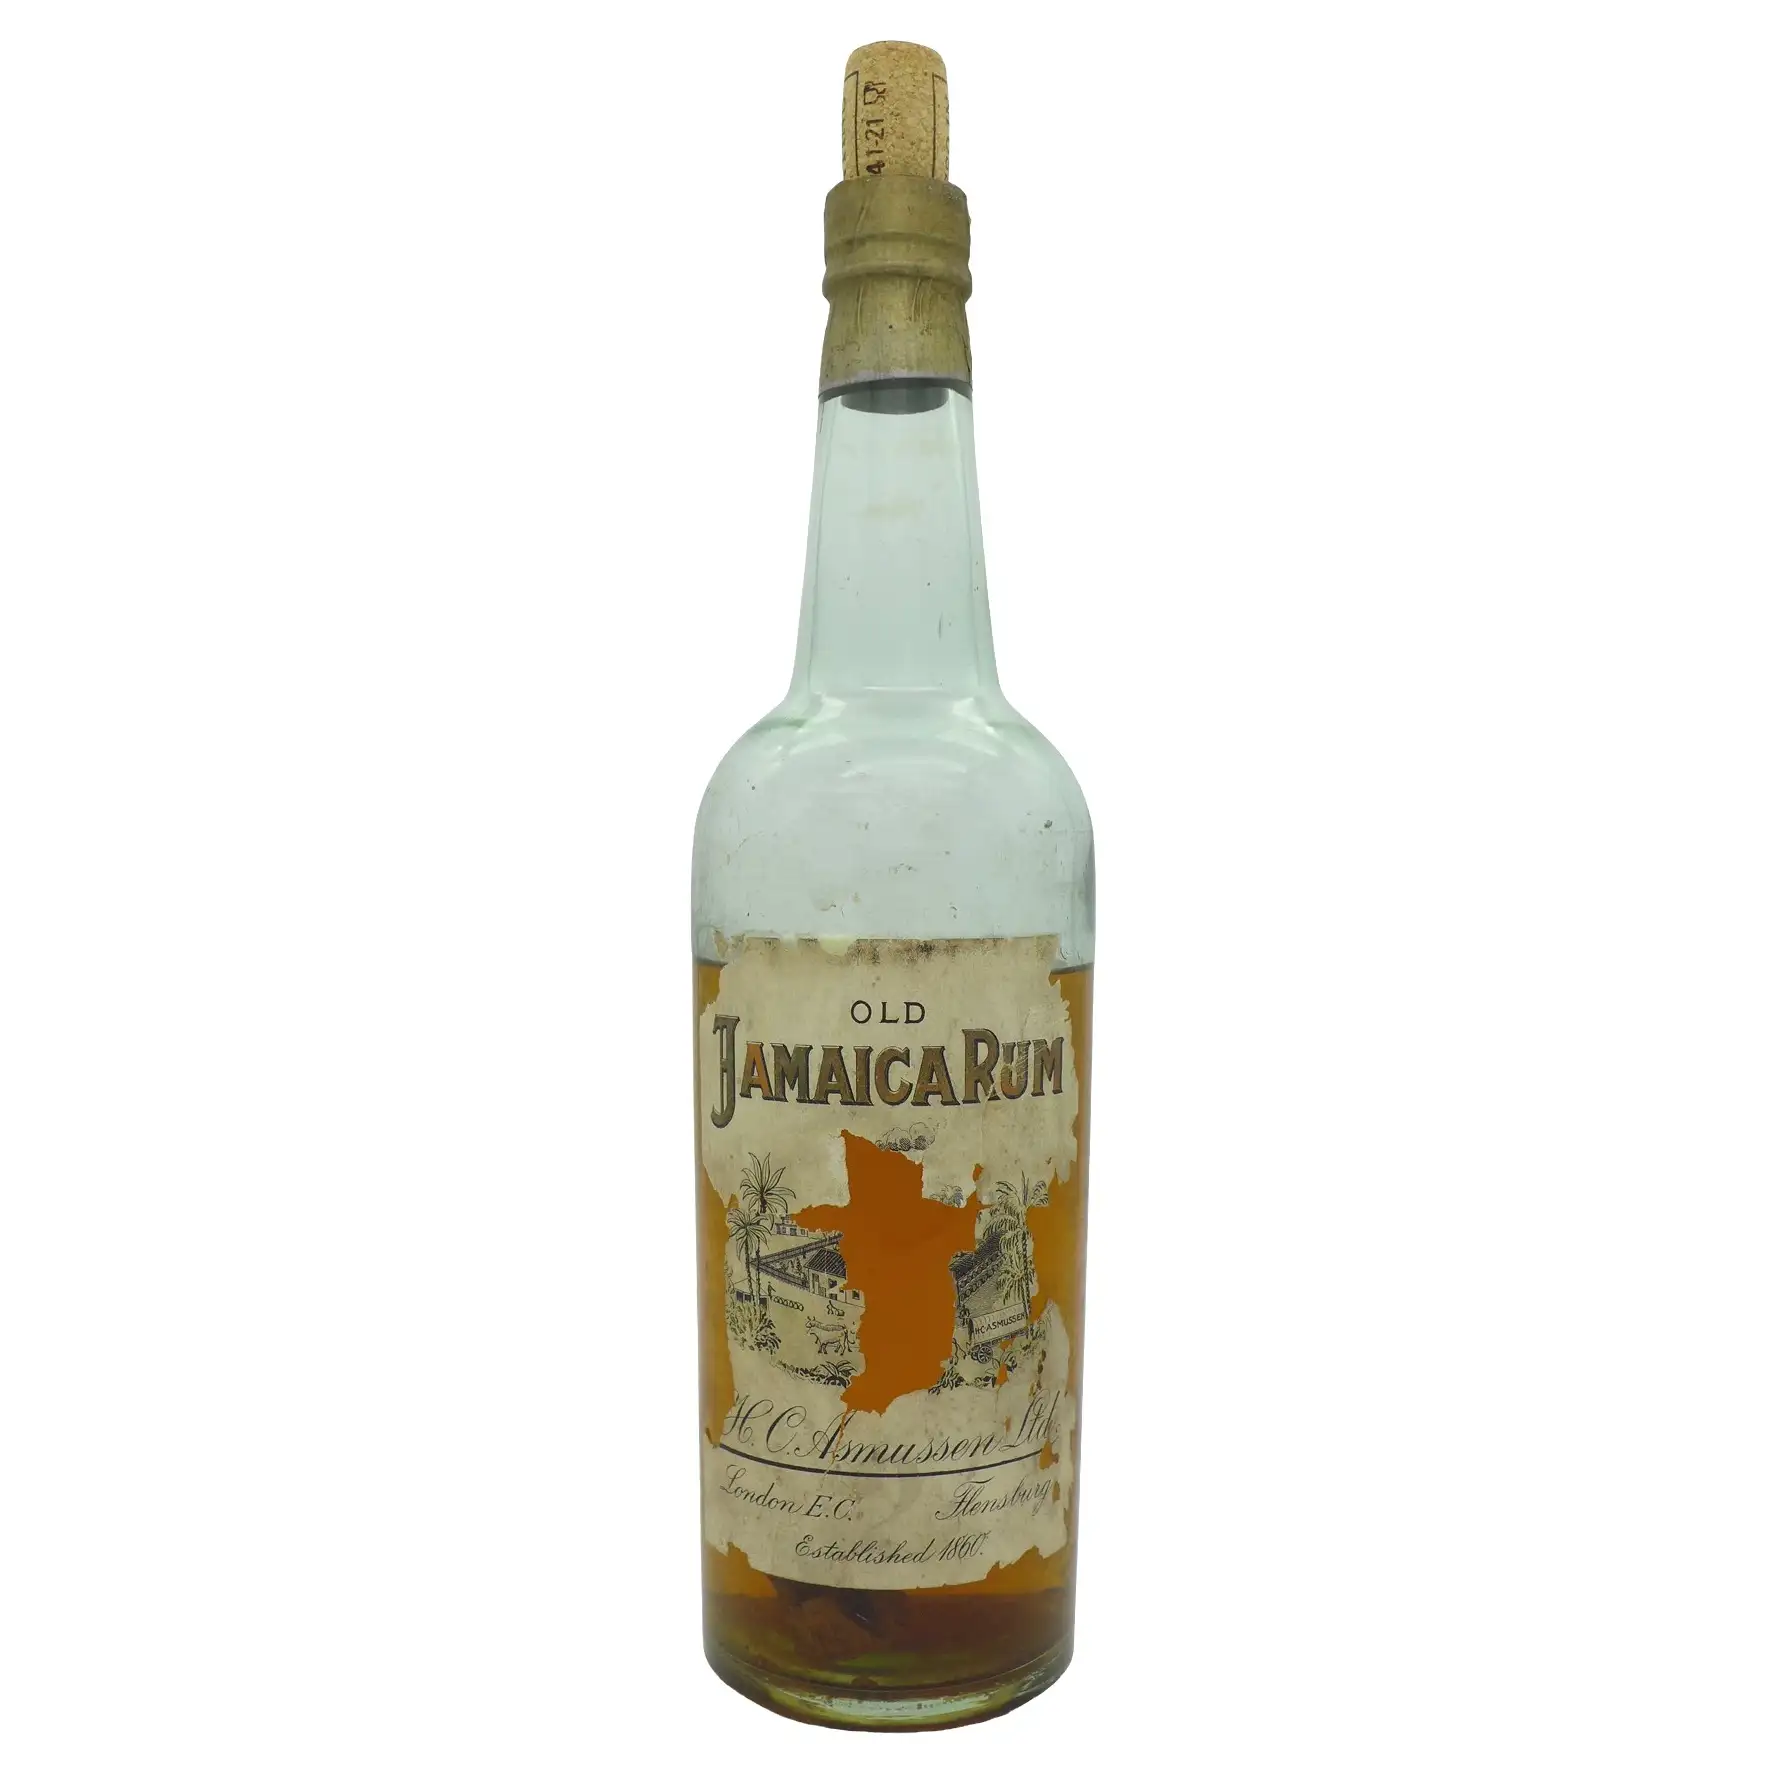 Image of the front of the bottle of the rum Asmussen Old Jamaica Rum